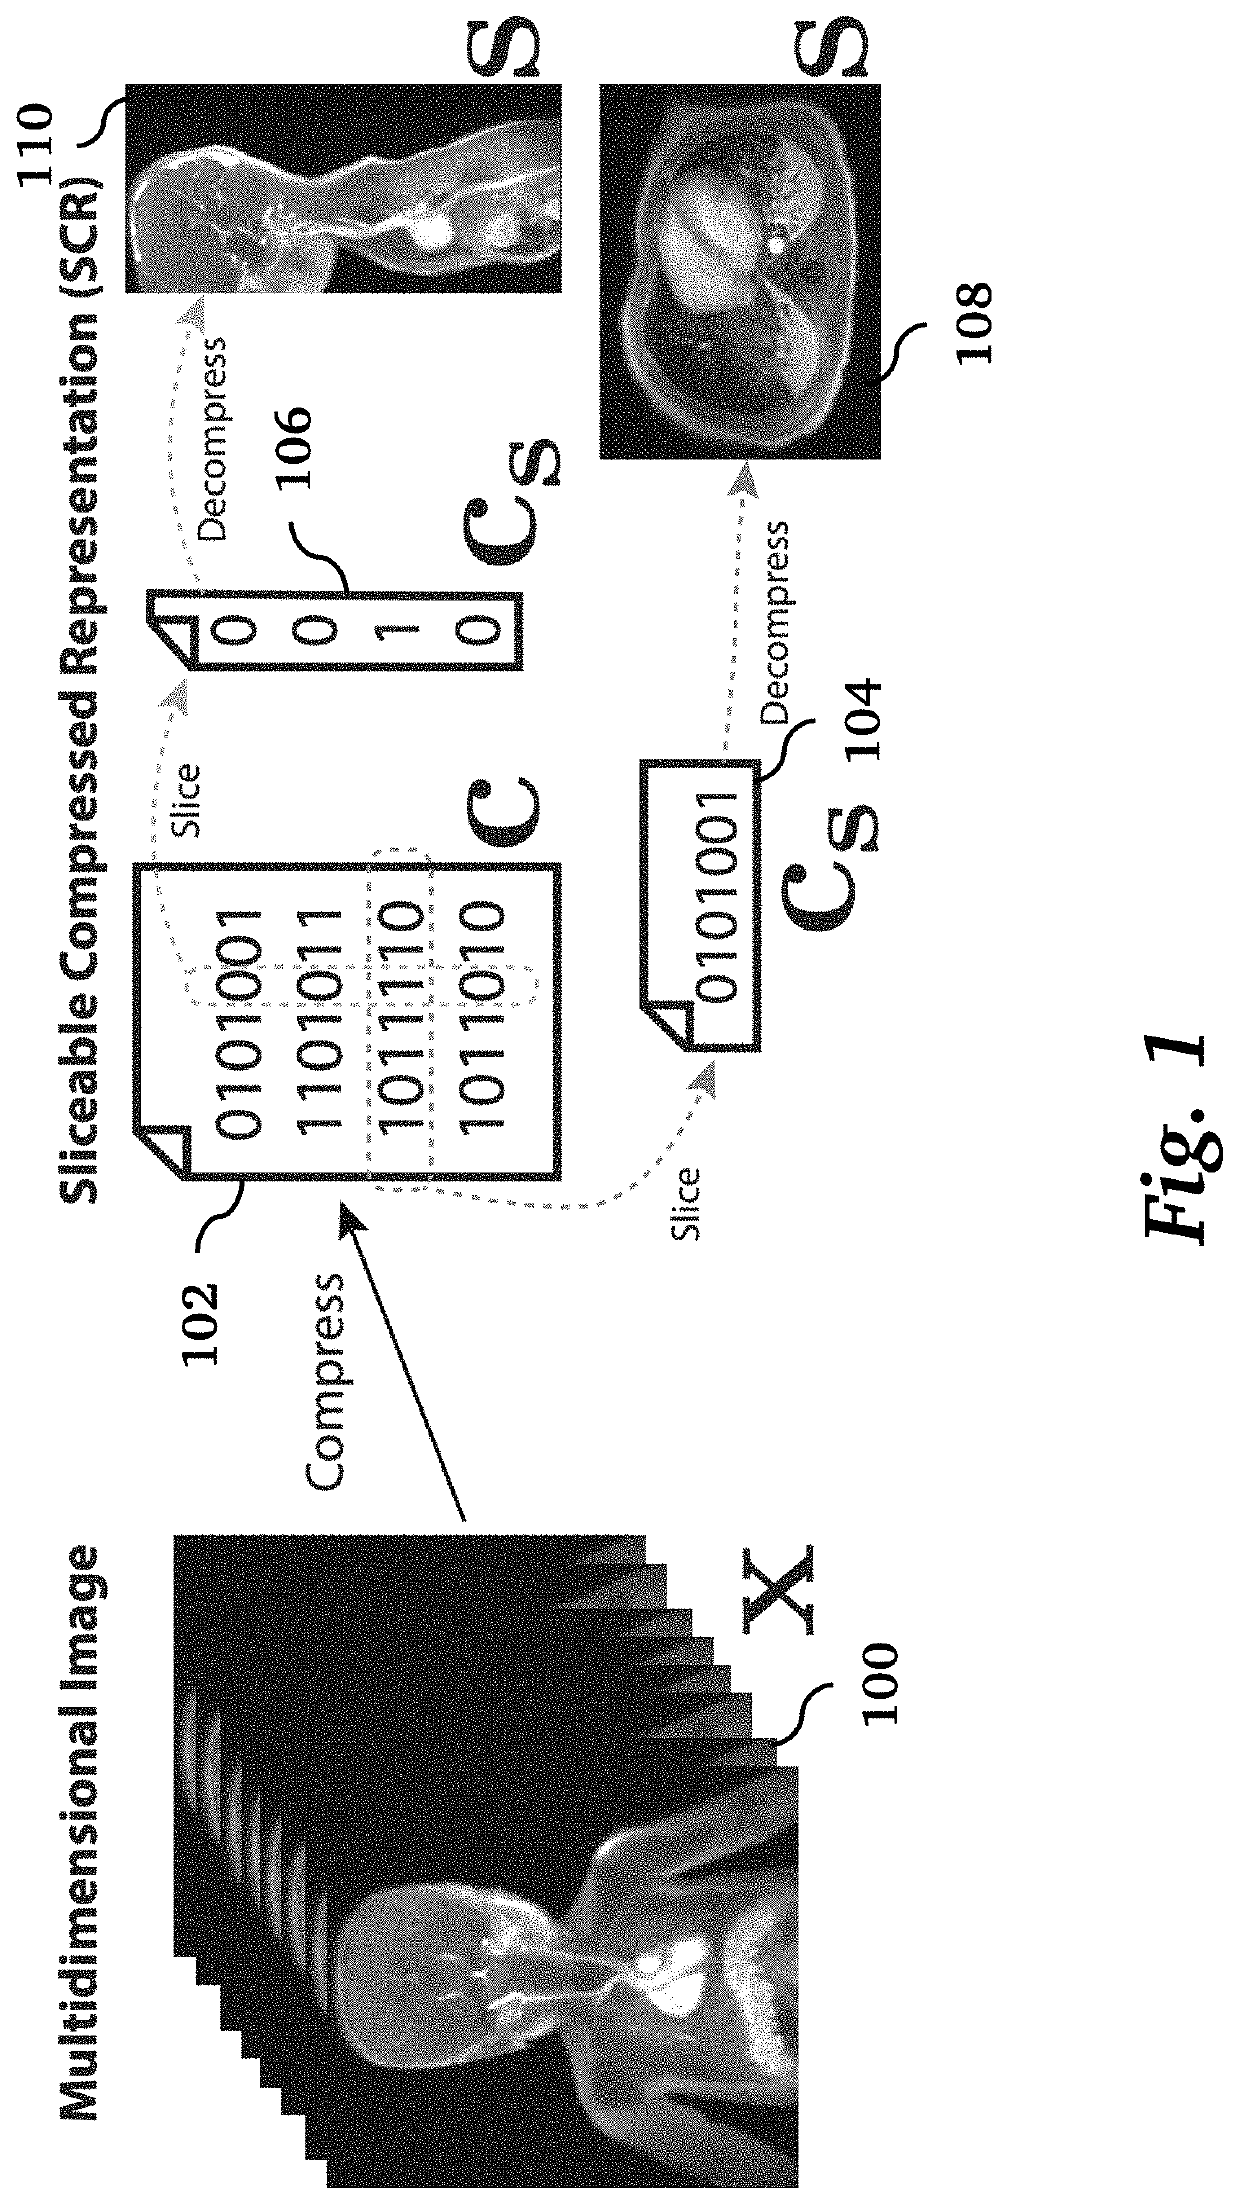 Methods for Reconstruction Coupled, Fast and Memory Efficient Visualization for High Dimensional Medical Image Datasets